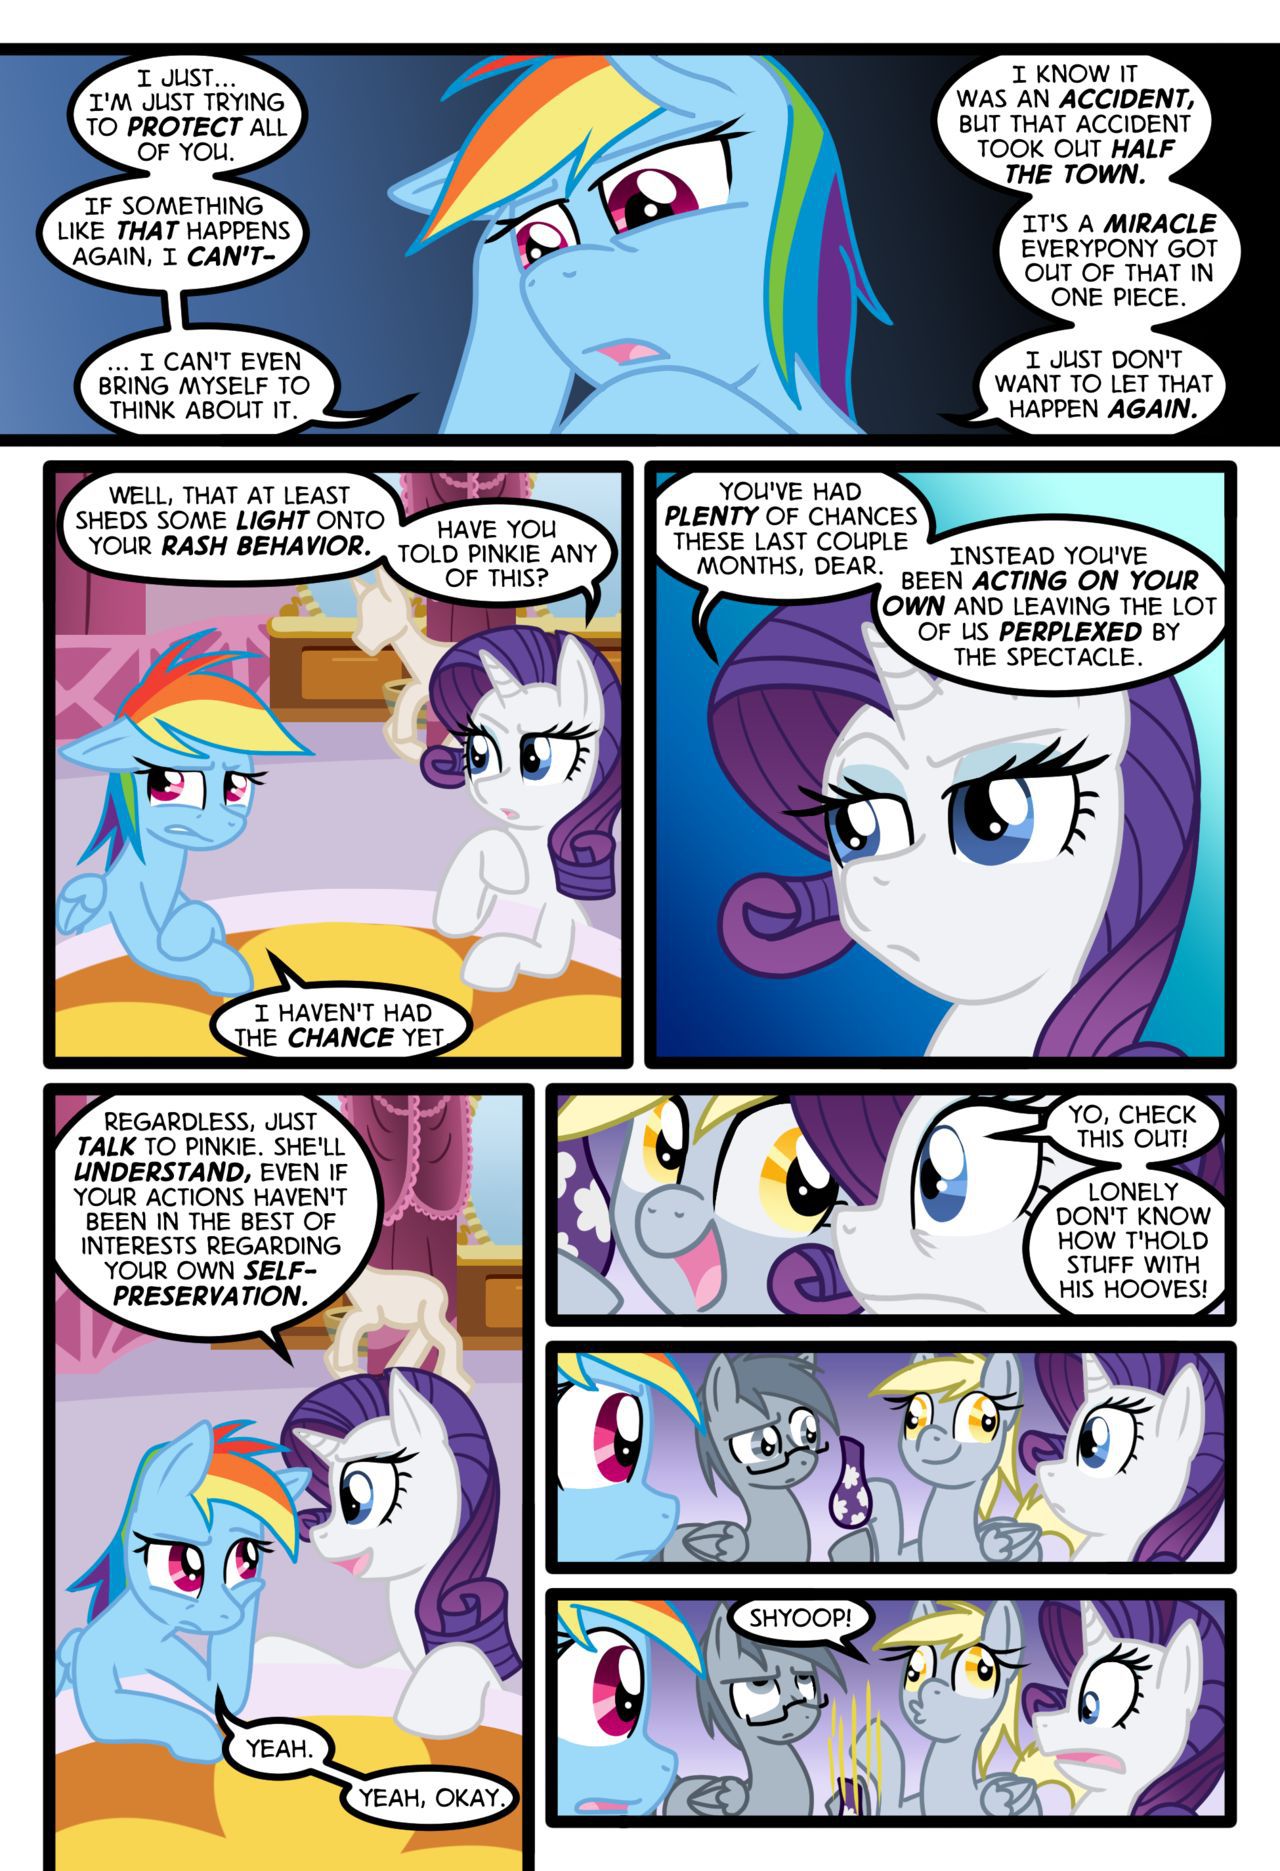 [Zaron] Lonely Hooves (My Little Pony Friendship Is Magic) [Ongoing] 33